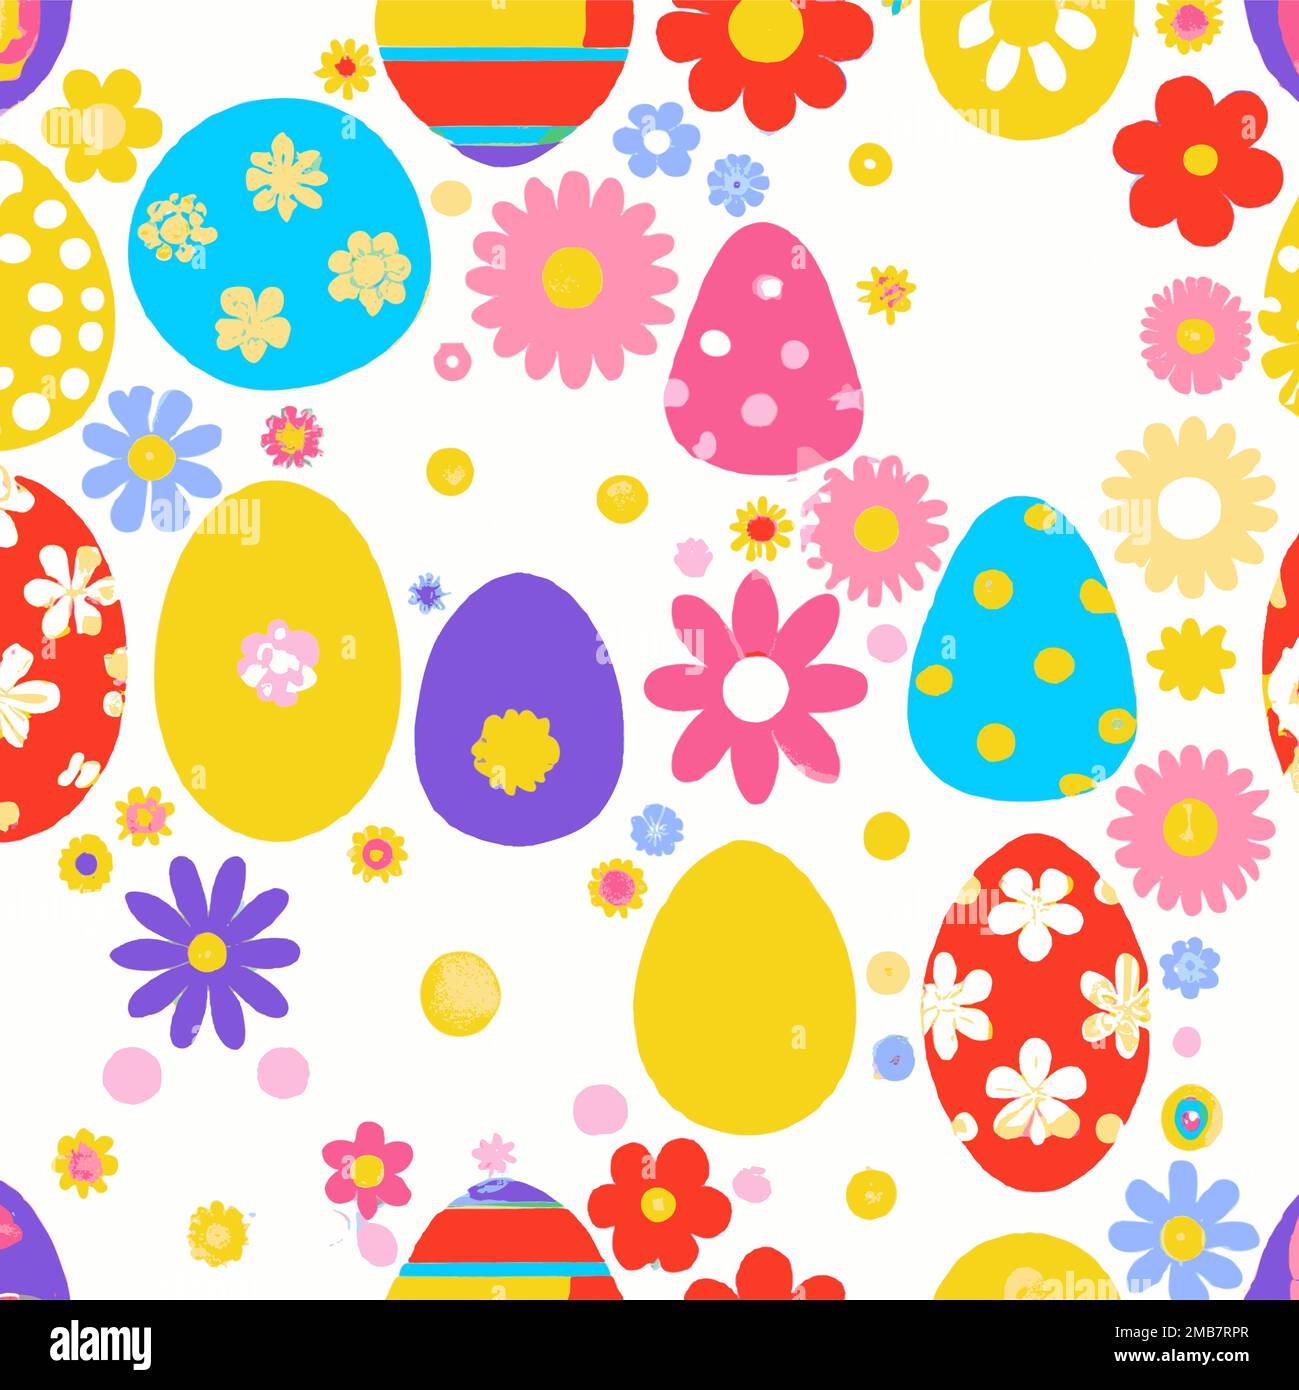 Illustration of many colorful decorated Easter eggs and flowers background pattern, red, yellow, green, blue, bright and pastel Stock Vector